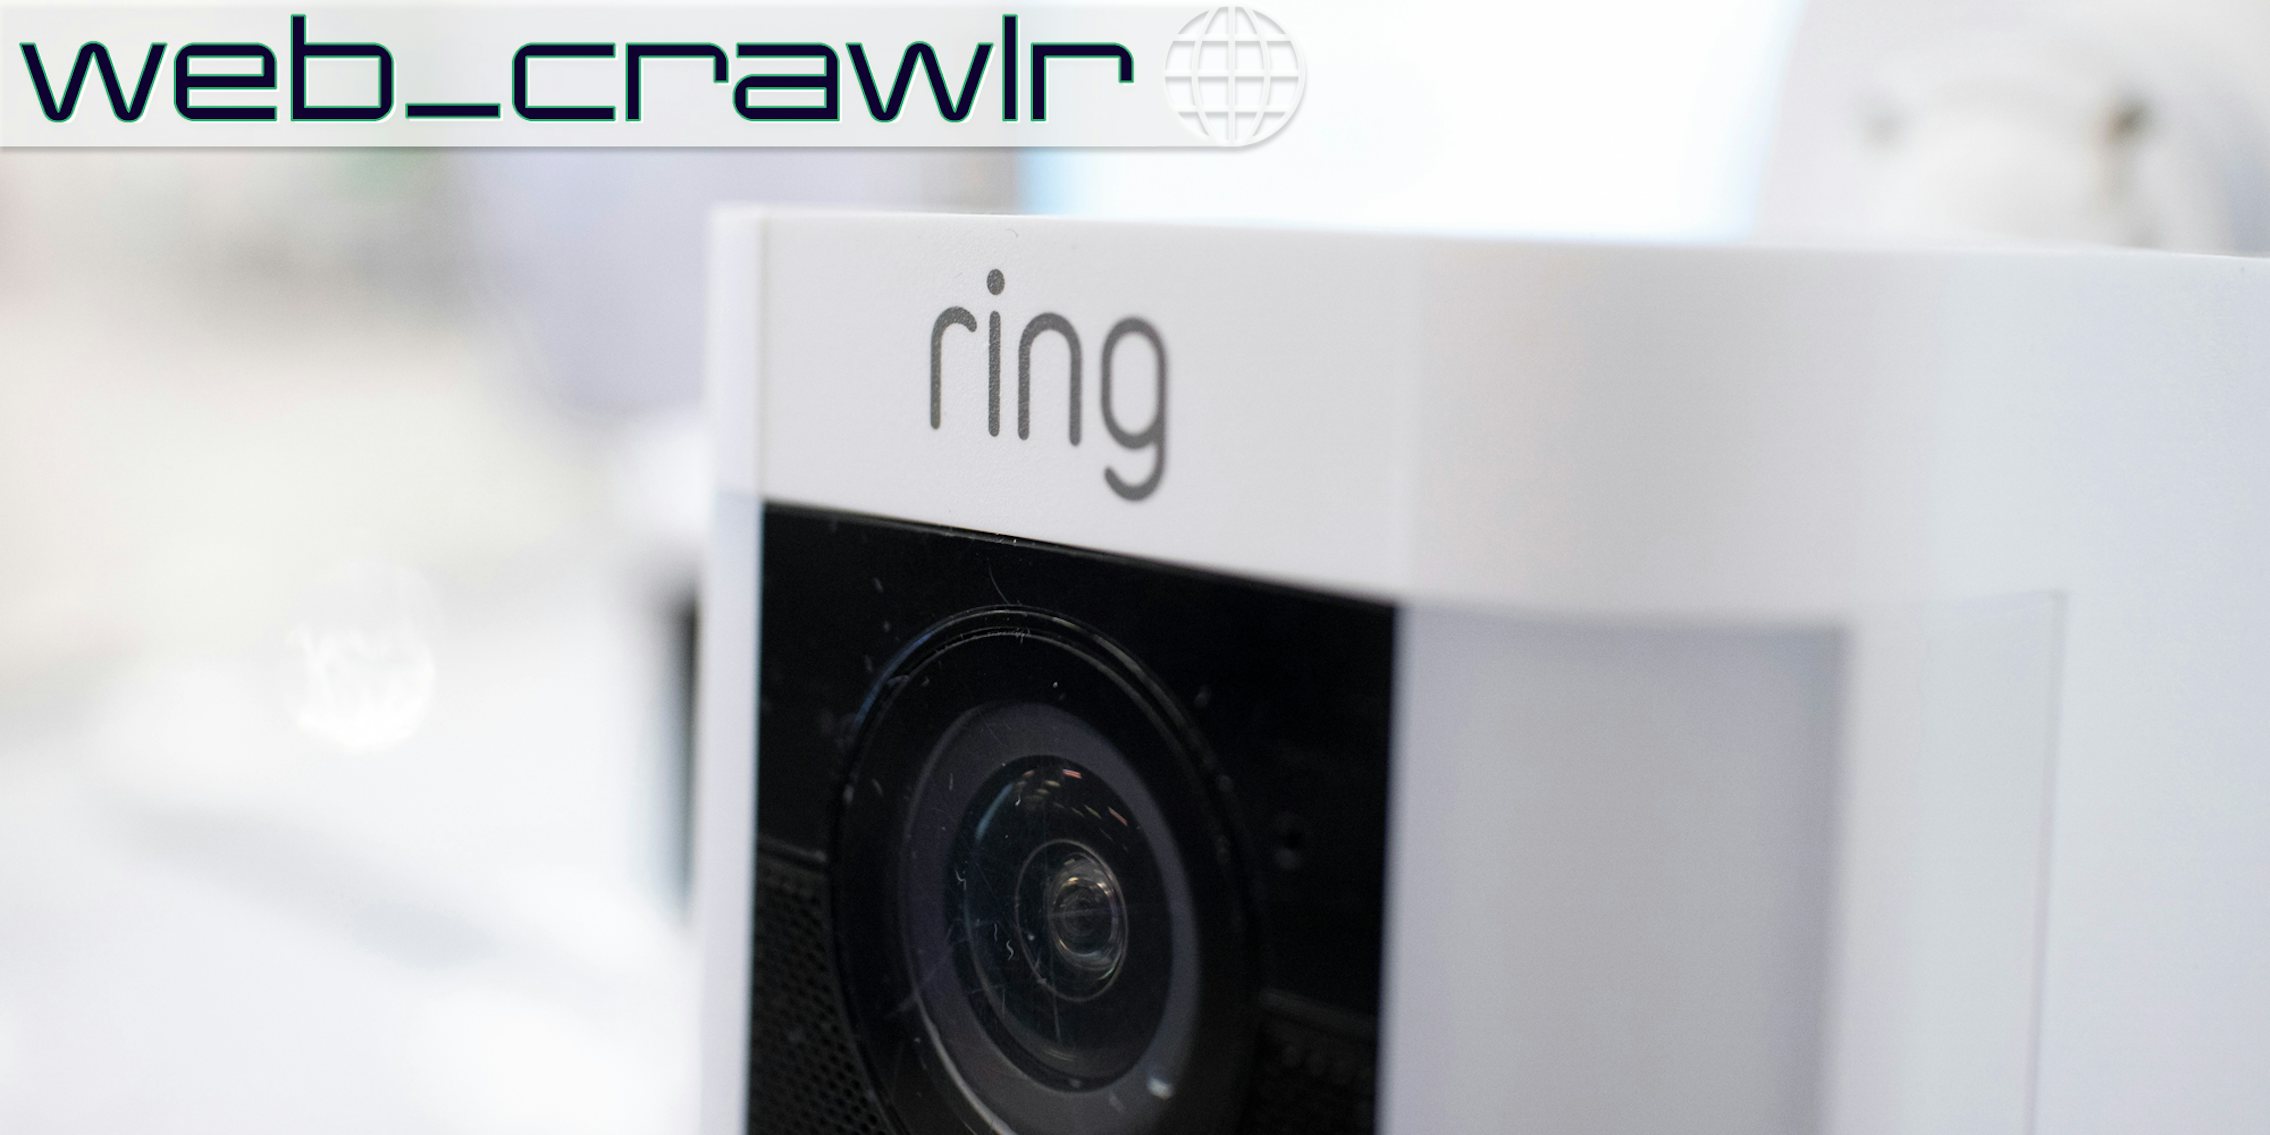 A Ring camera. The Daily Dot newsletter web_crawlr logo is in the top left corner.